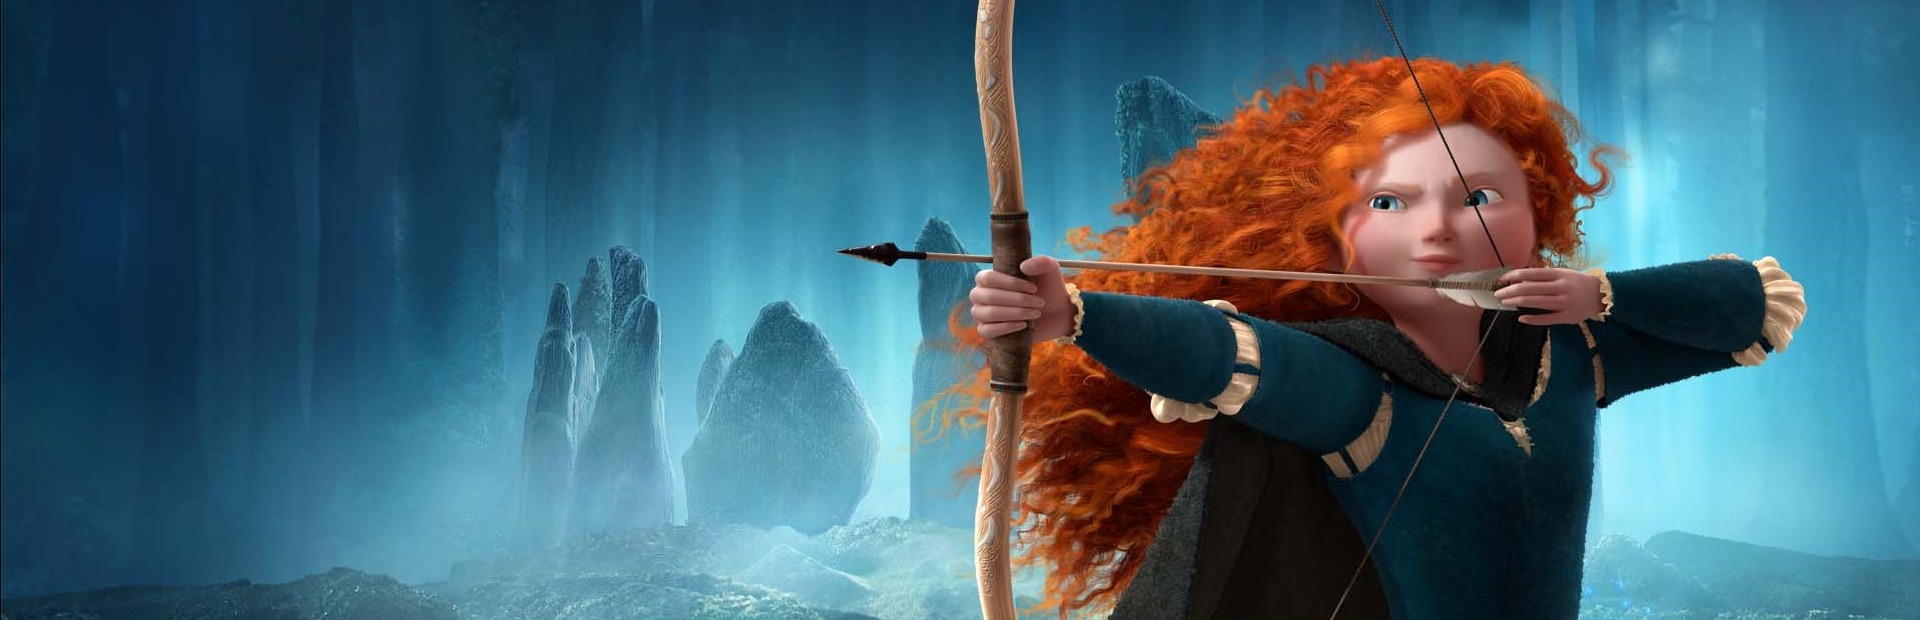 Brave: The Video Game Review - Disney's Latest Adaptation Delivers